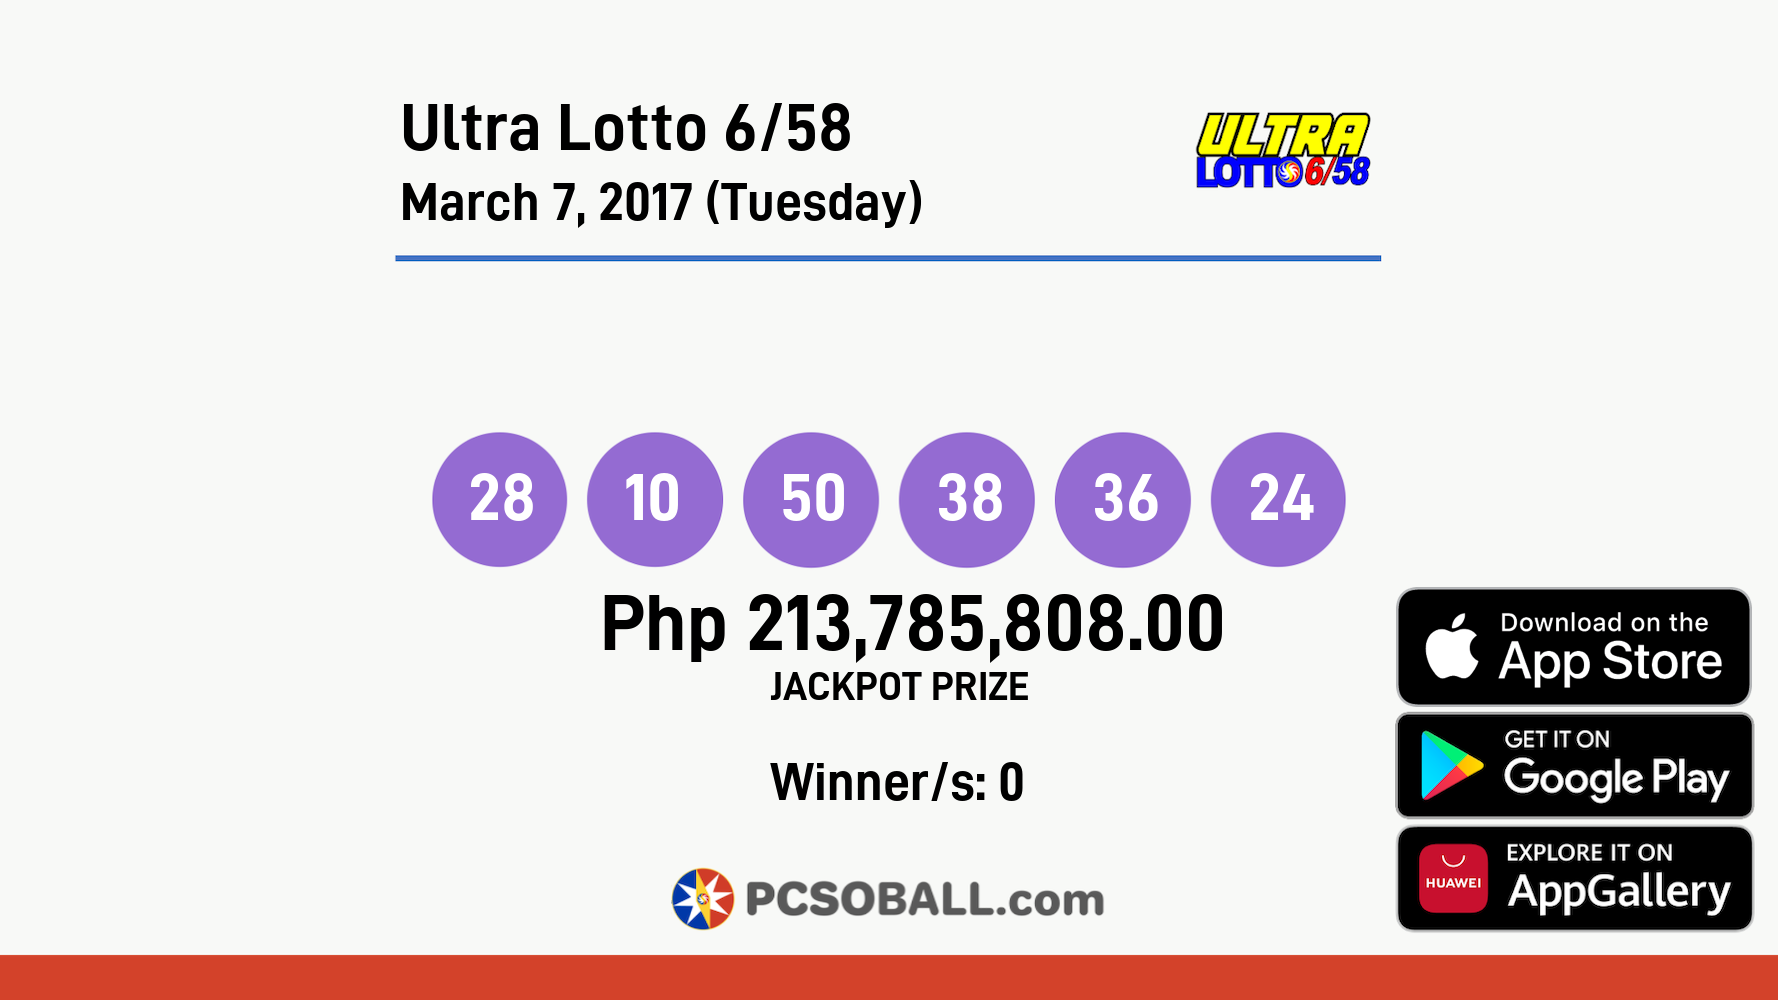 Ultra Lotto 6/58 March 7, 2017 (Tuesday) Result